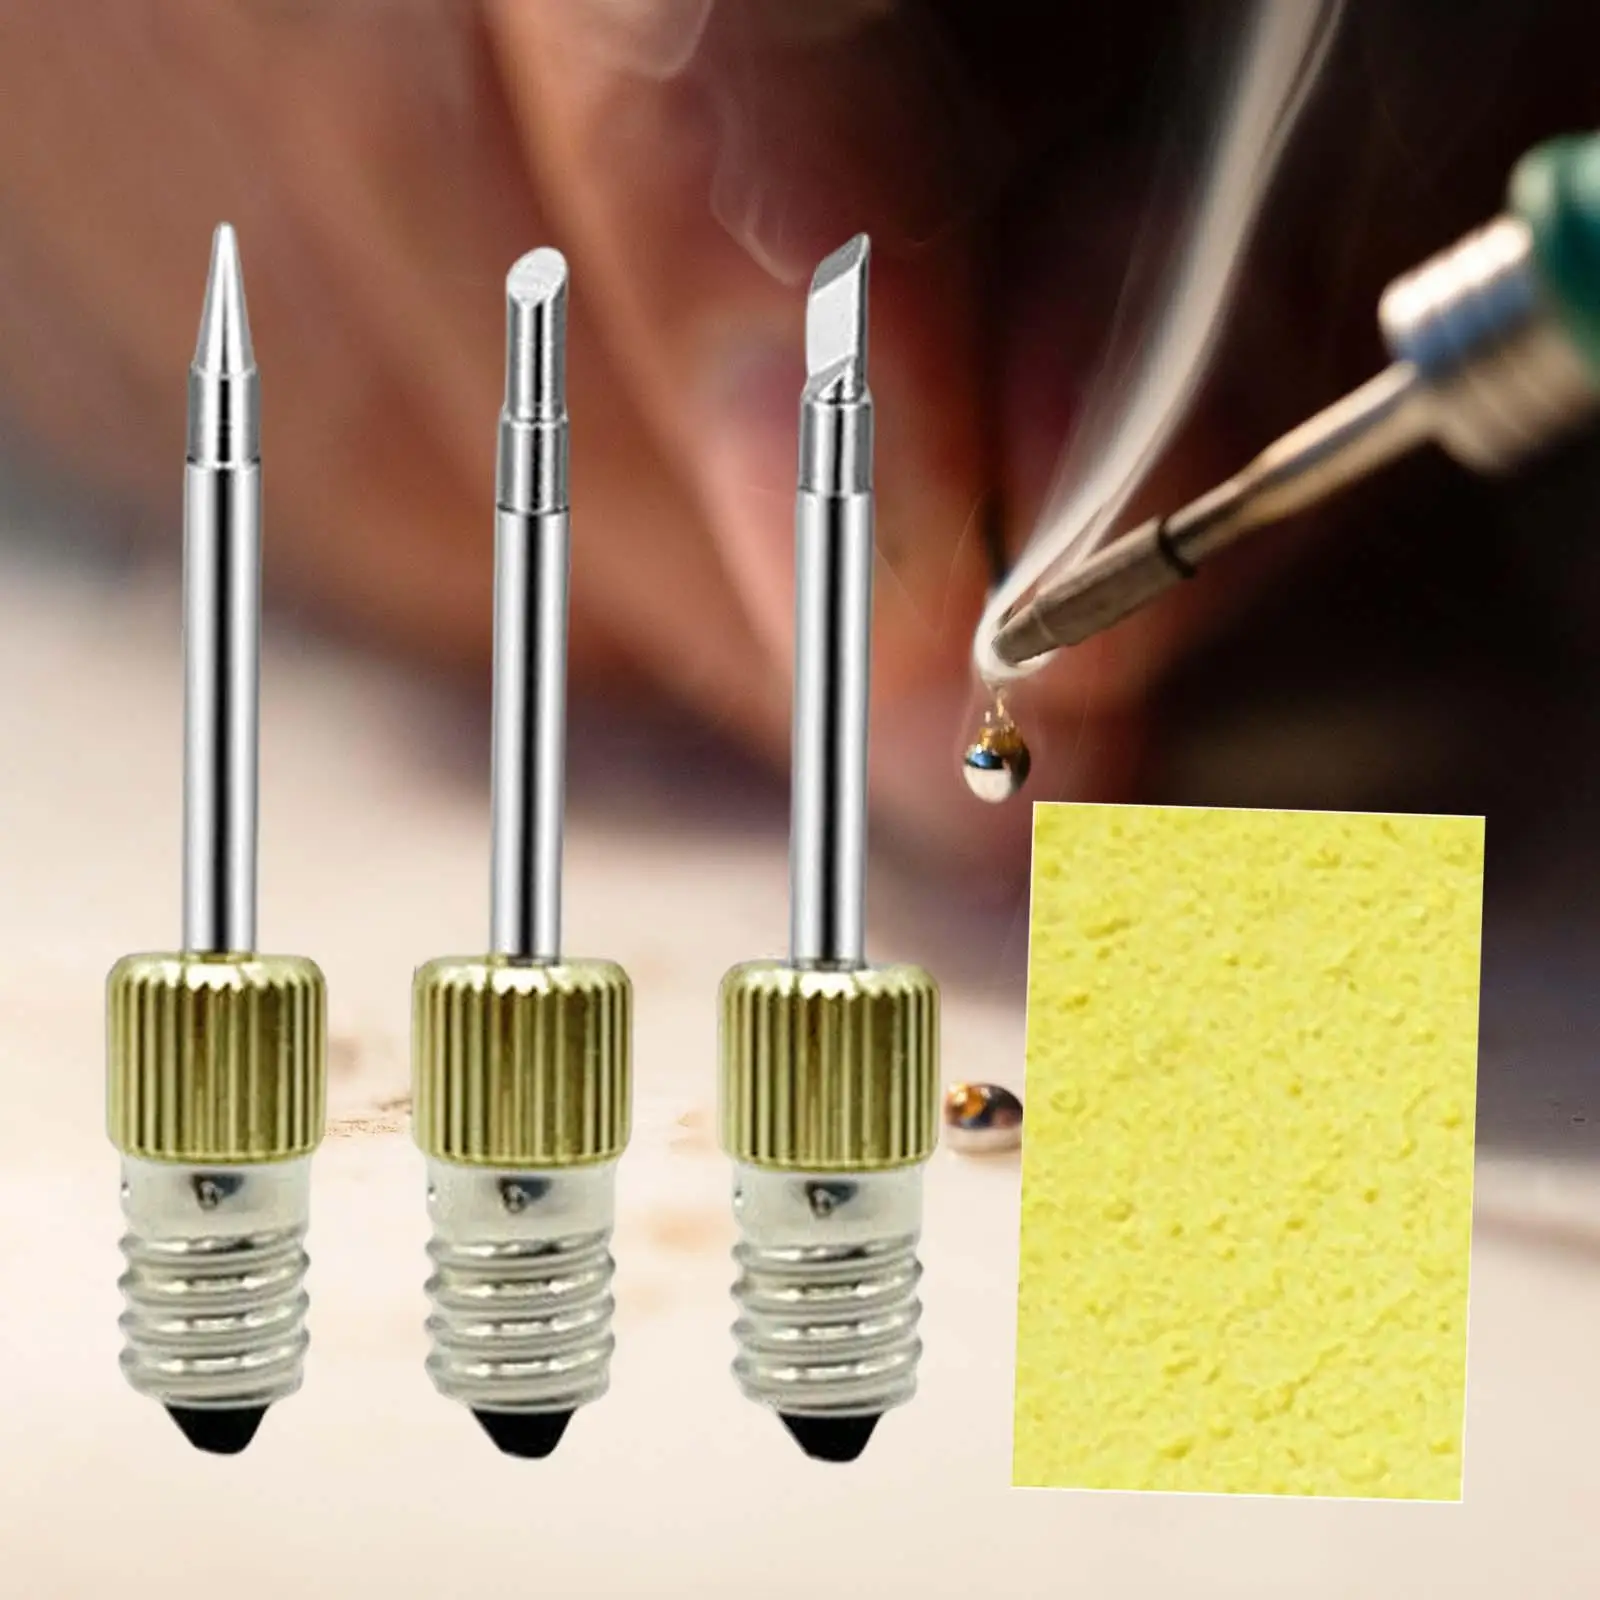 3Pcs Soldering Iron Tips with Cleaning Sponge E10 Soldering Tips Accessories